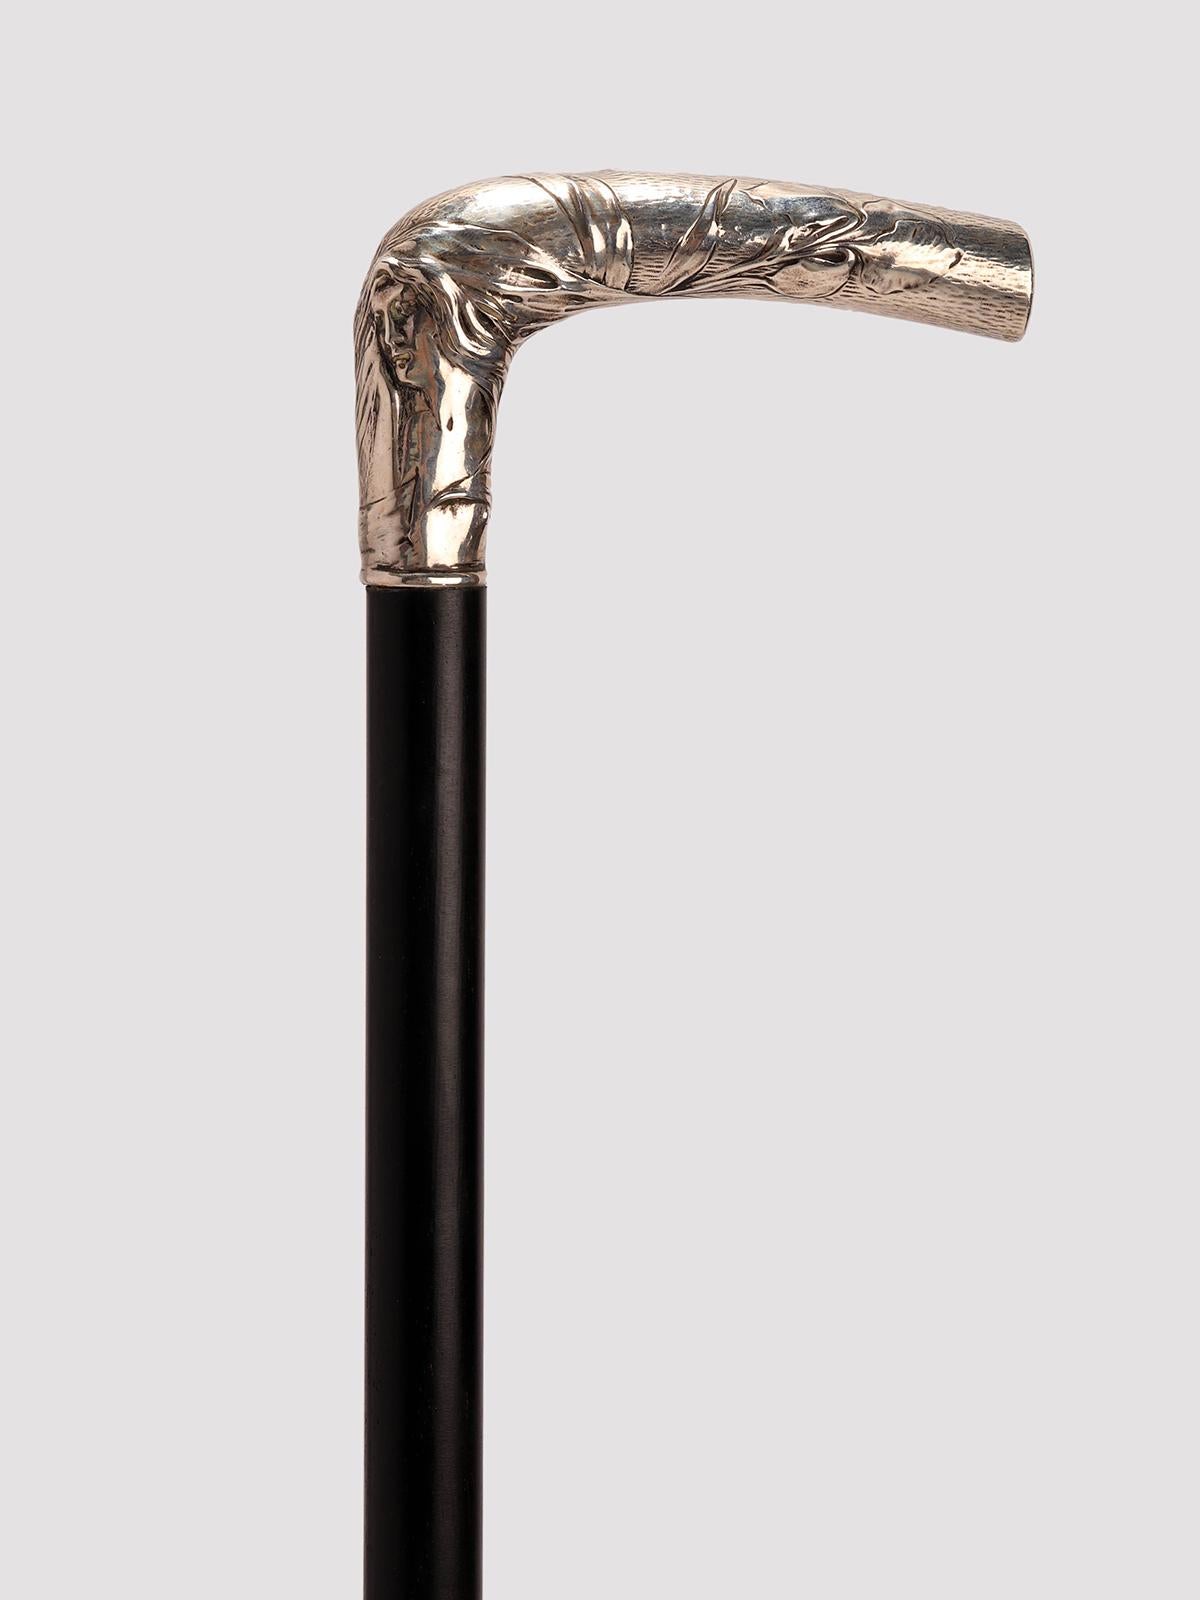 Art Nouveau walking stick. The L-shaped 800 silver knob is embossed and chiselled and depicts the face of a woman with long loose hair and two Iris flowers. Ebony wood barrel. Metal tip. France circa 1900.